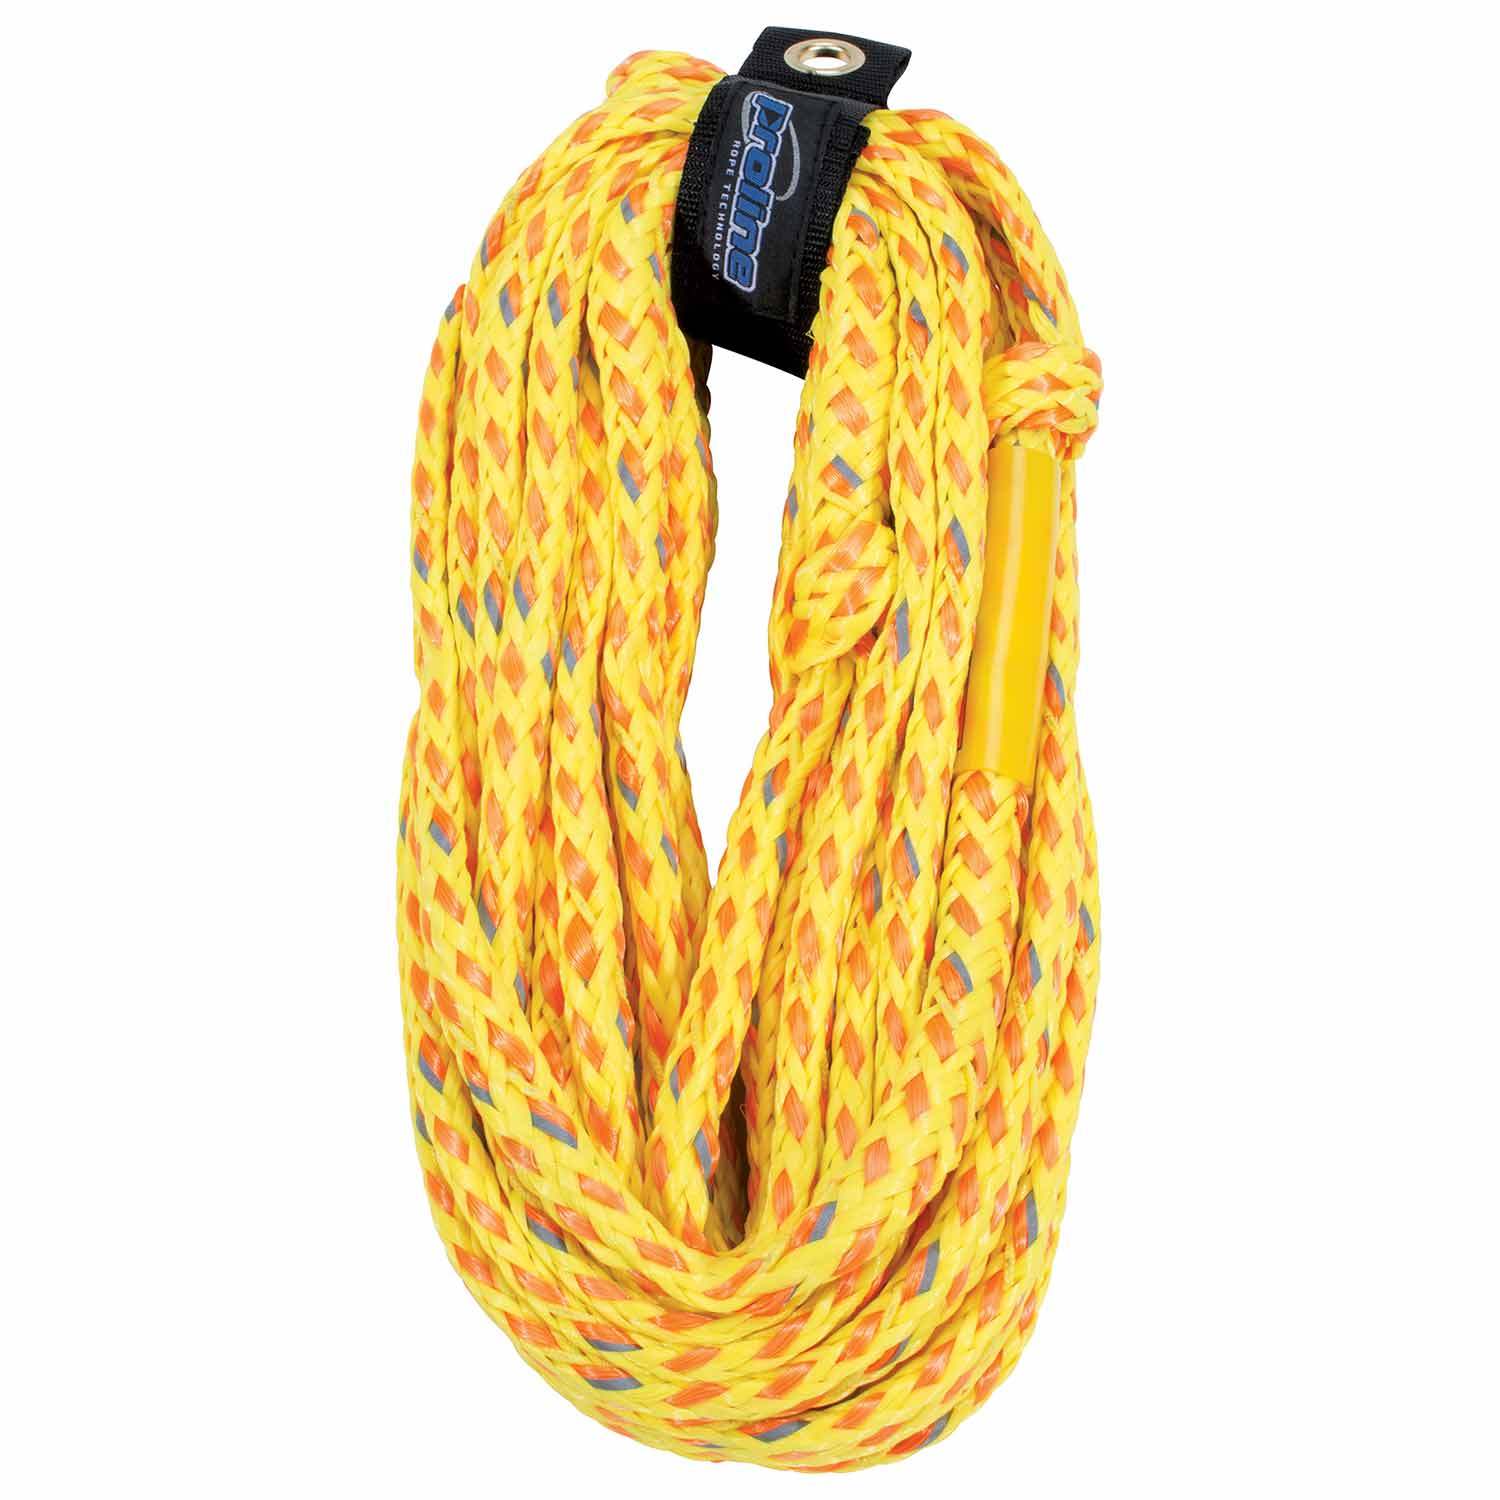 4 Rider safety Tube Rope